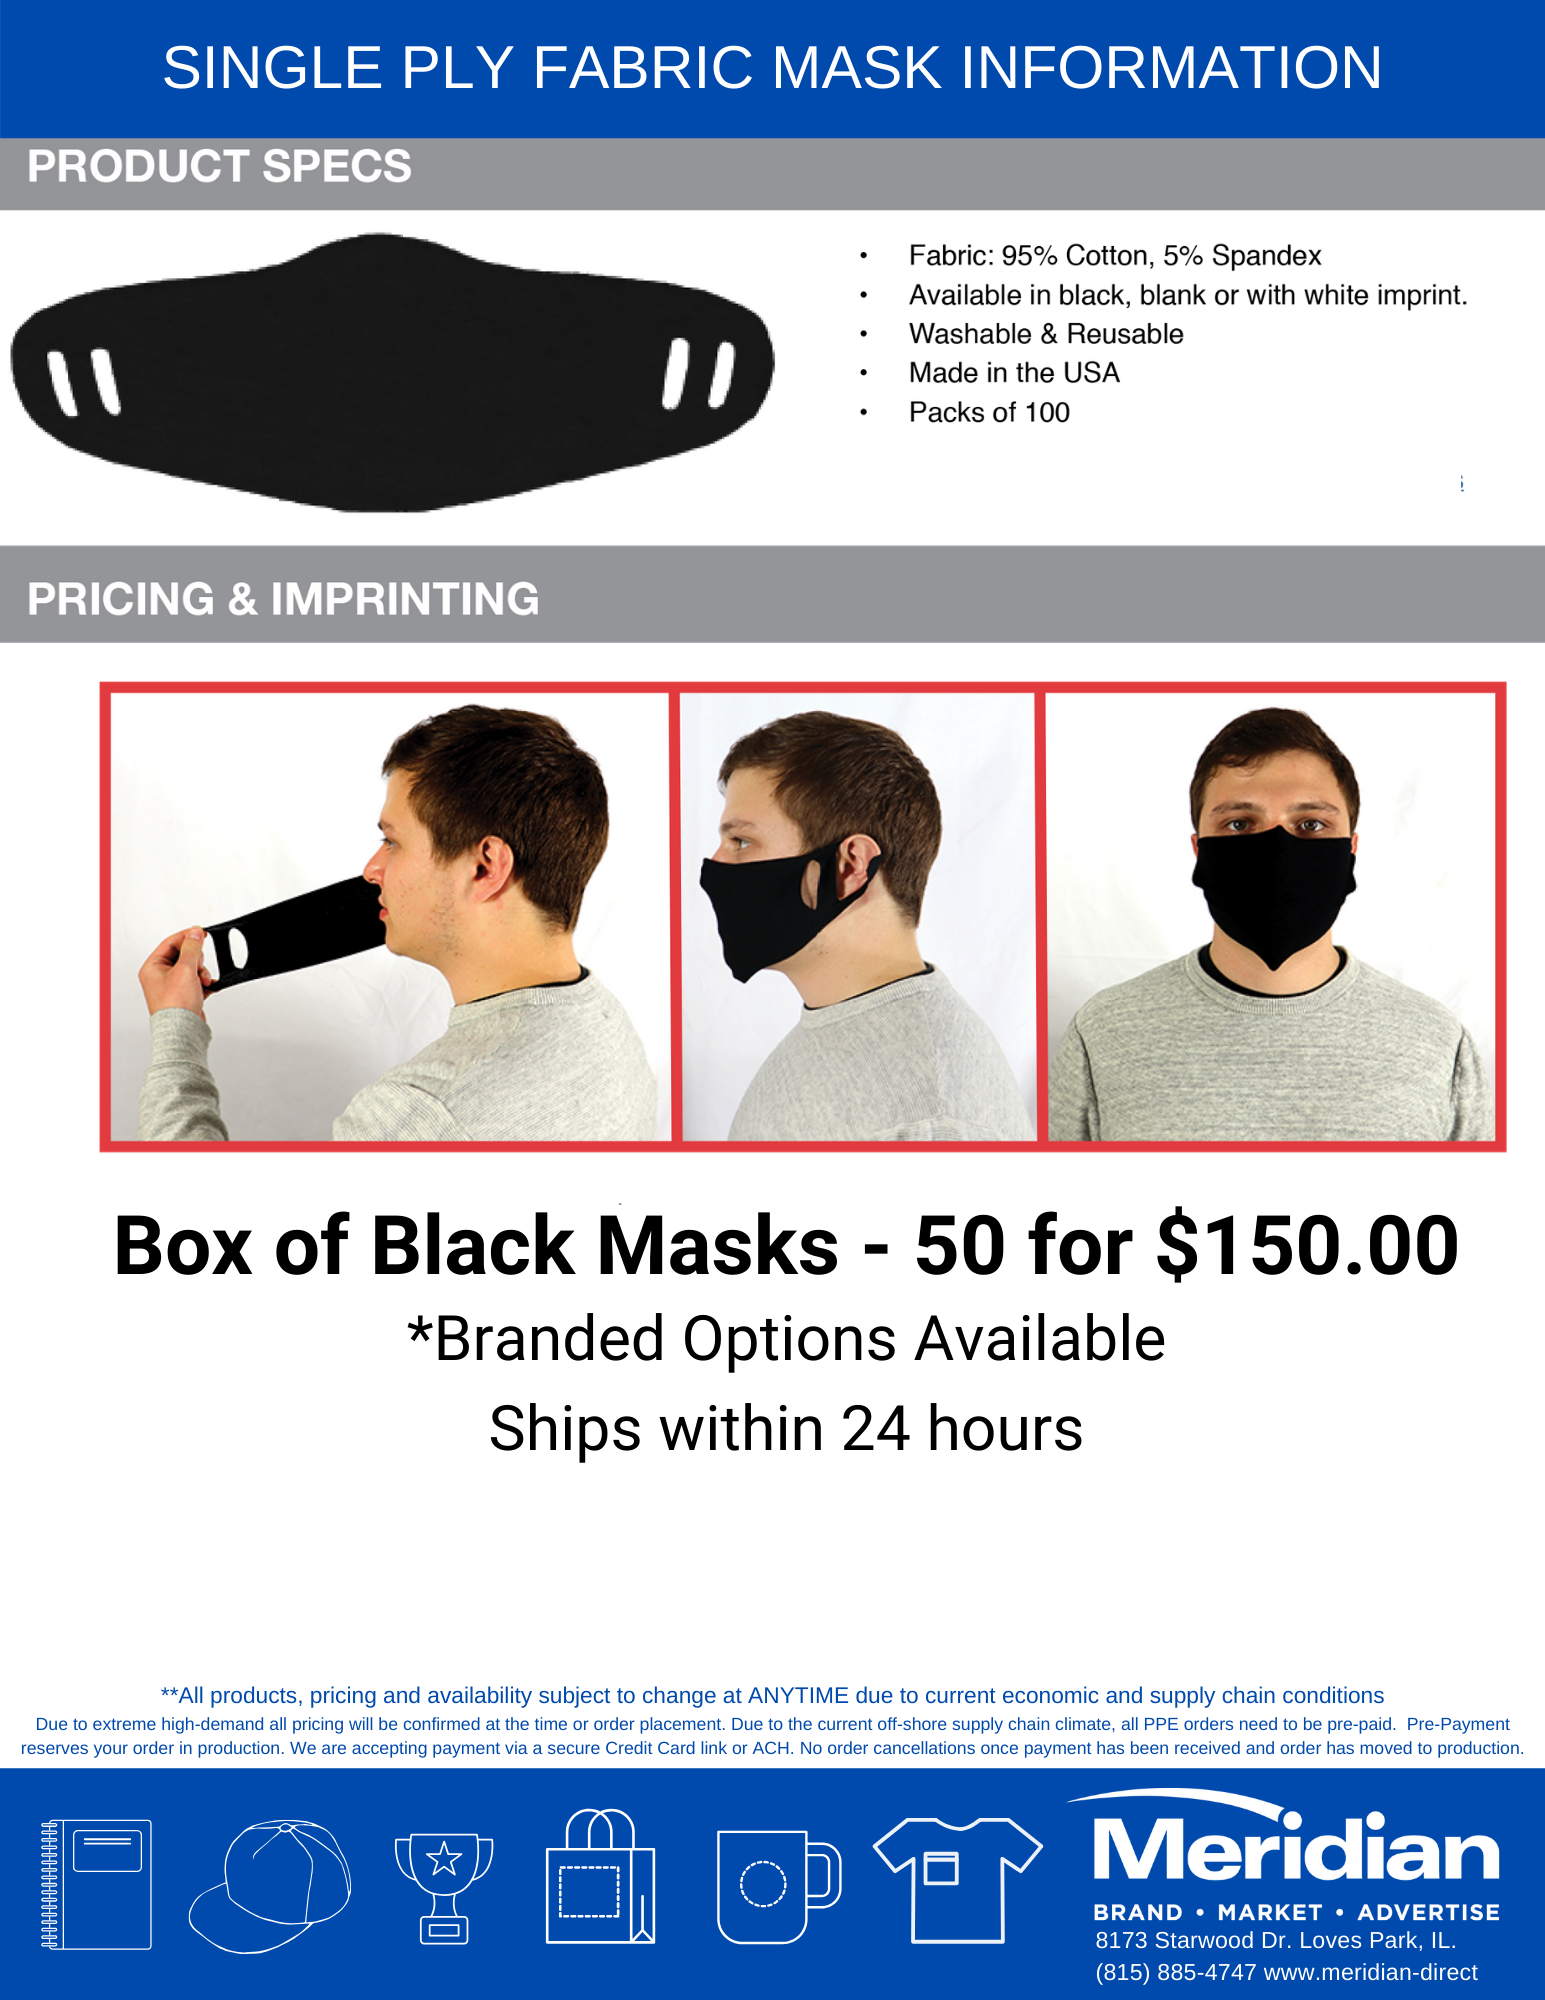 SINGLE-PLY-FABRIC-MASK-INFORMATION